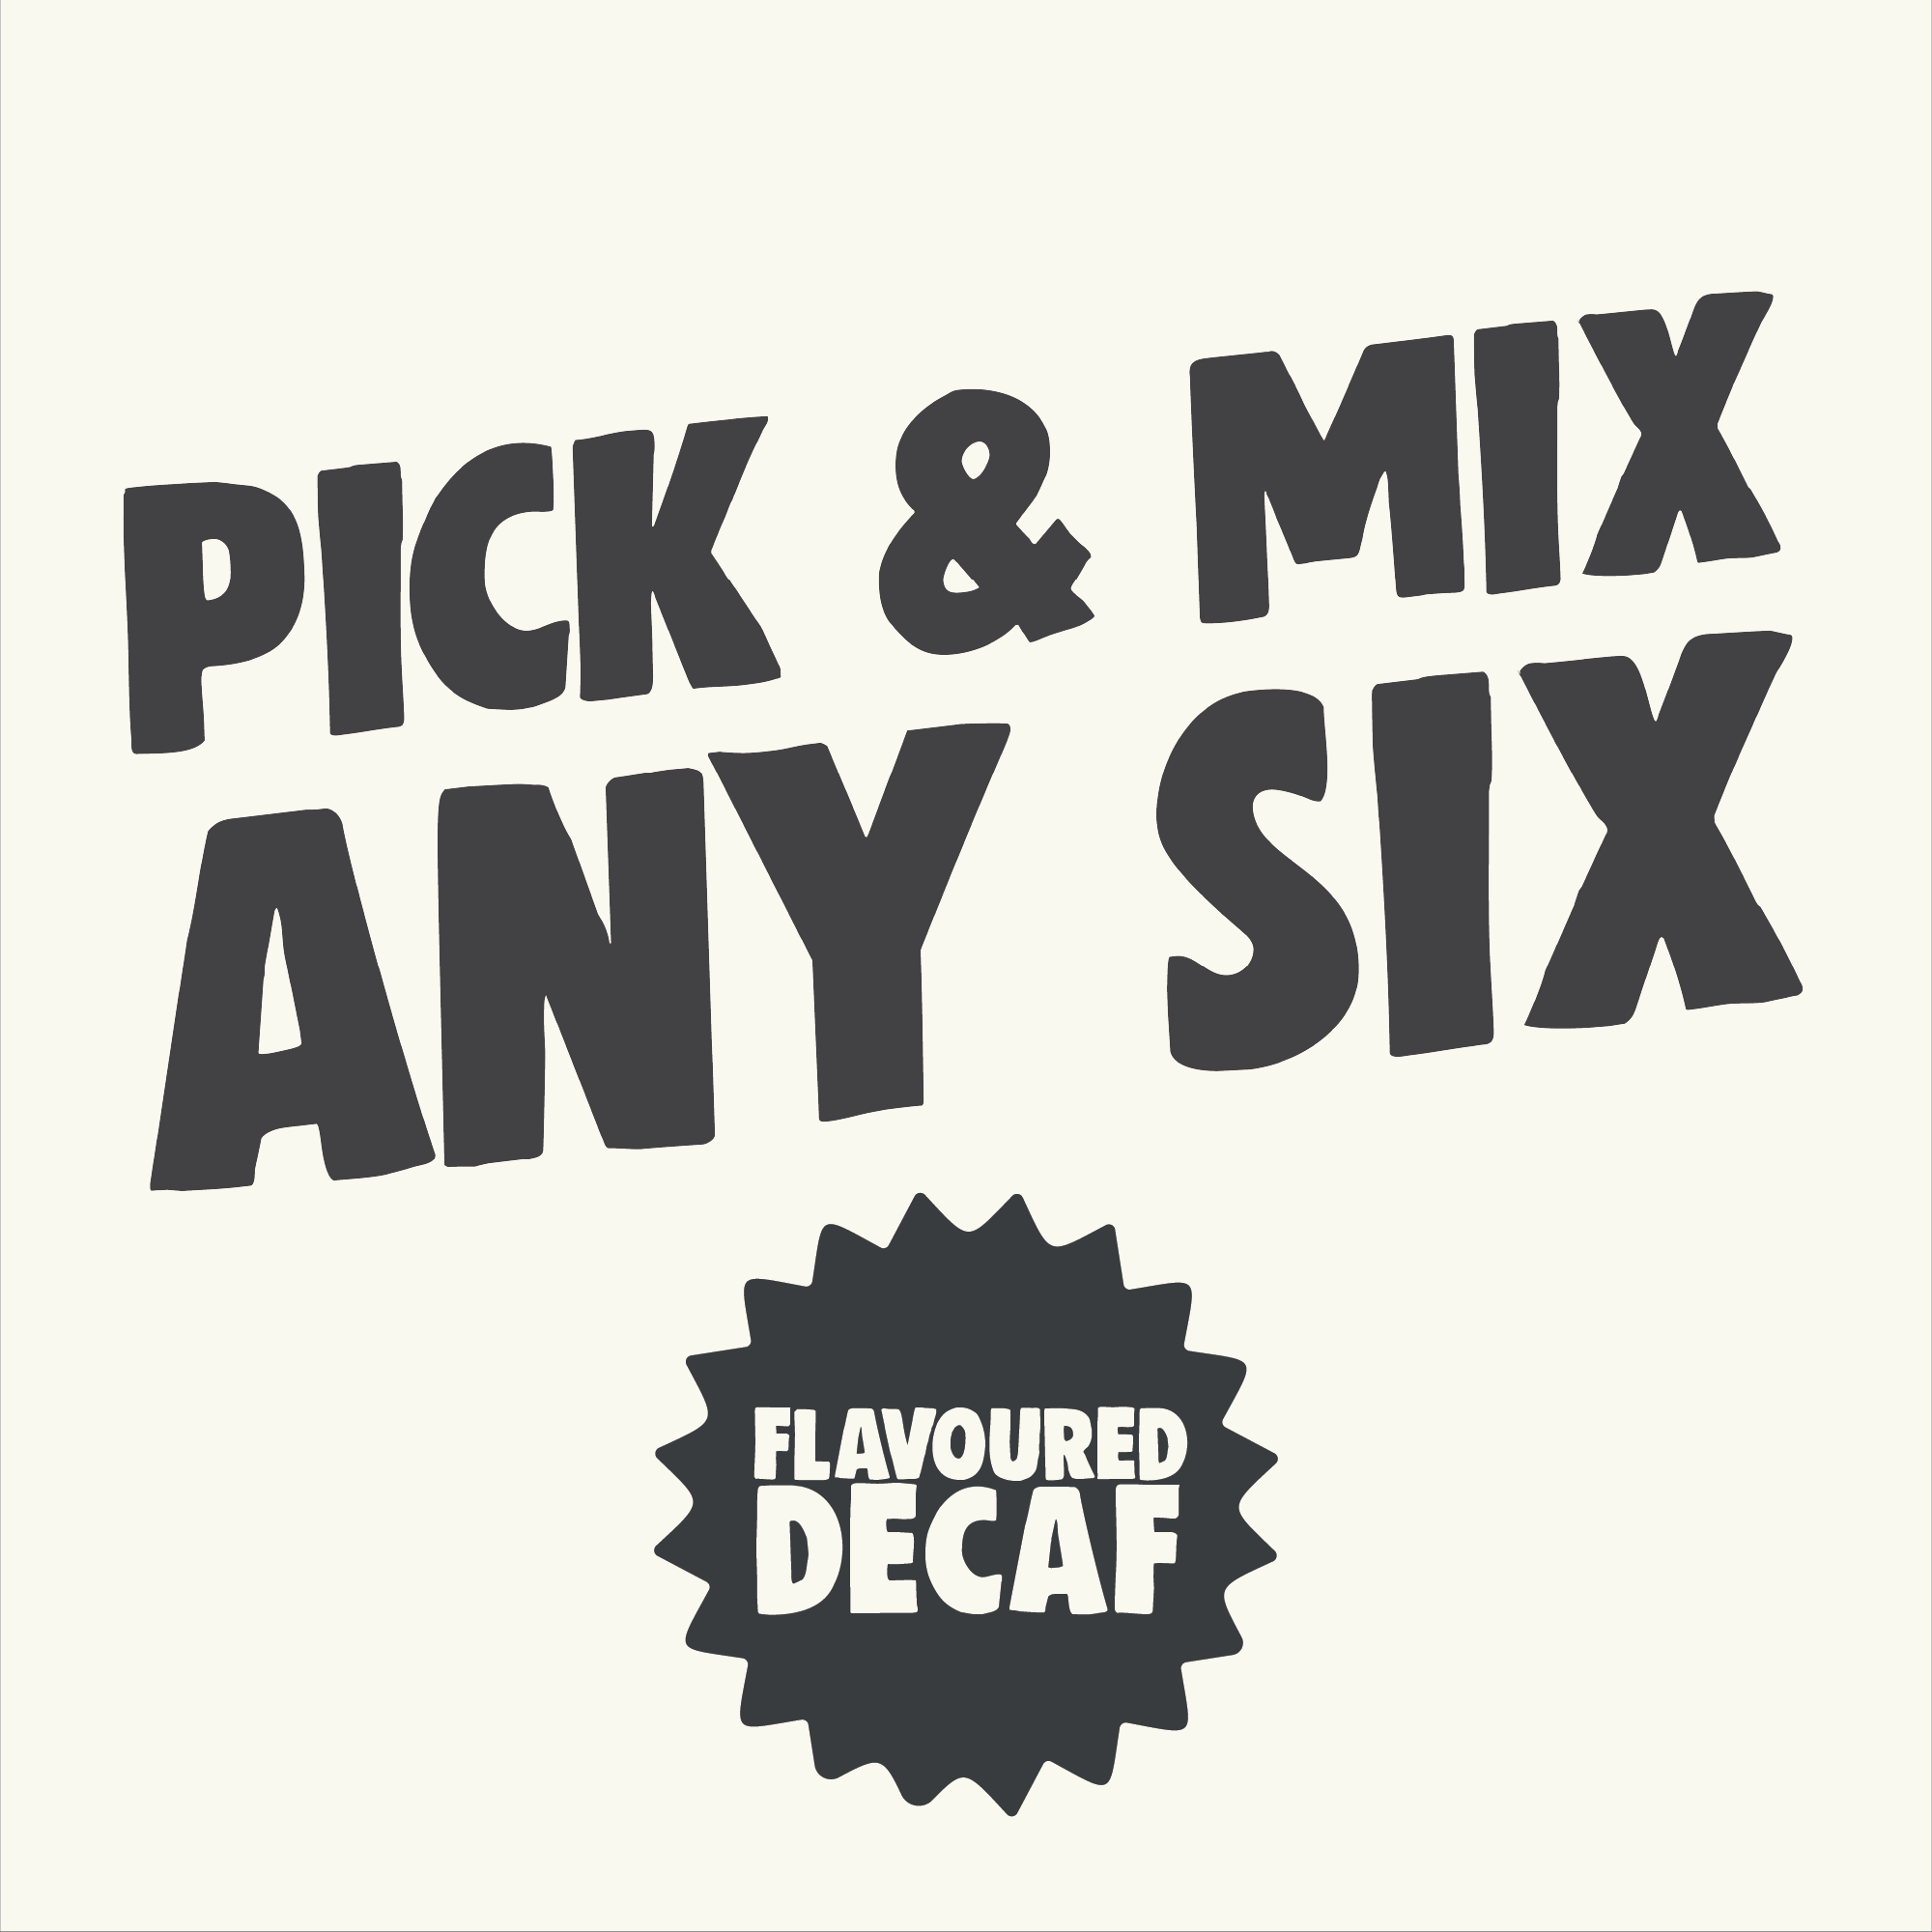 Mix & Match flavoured decaf